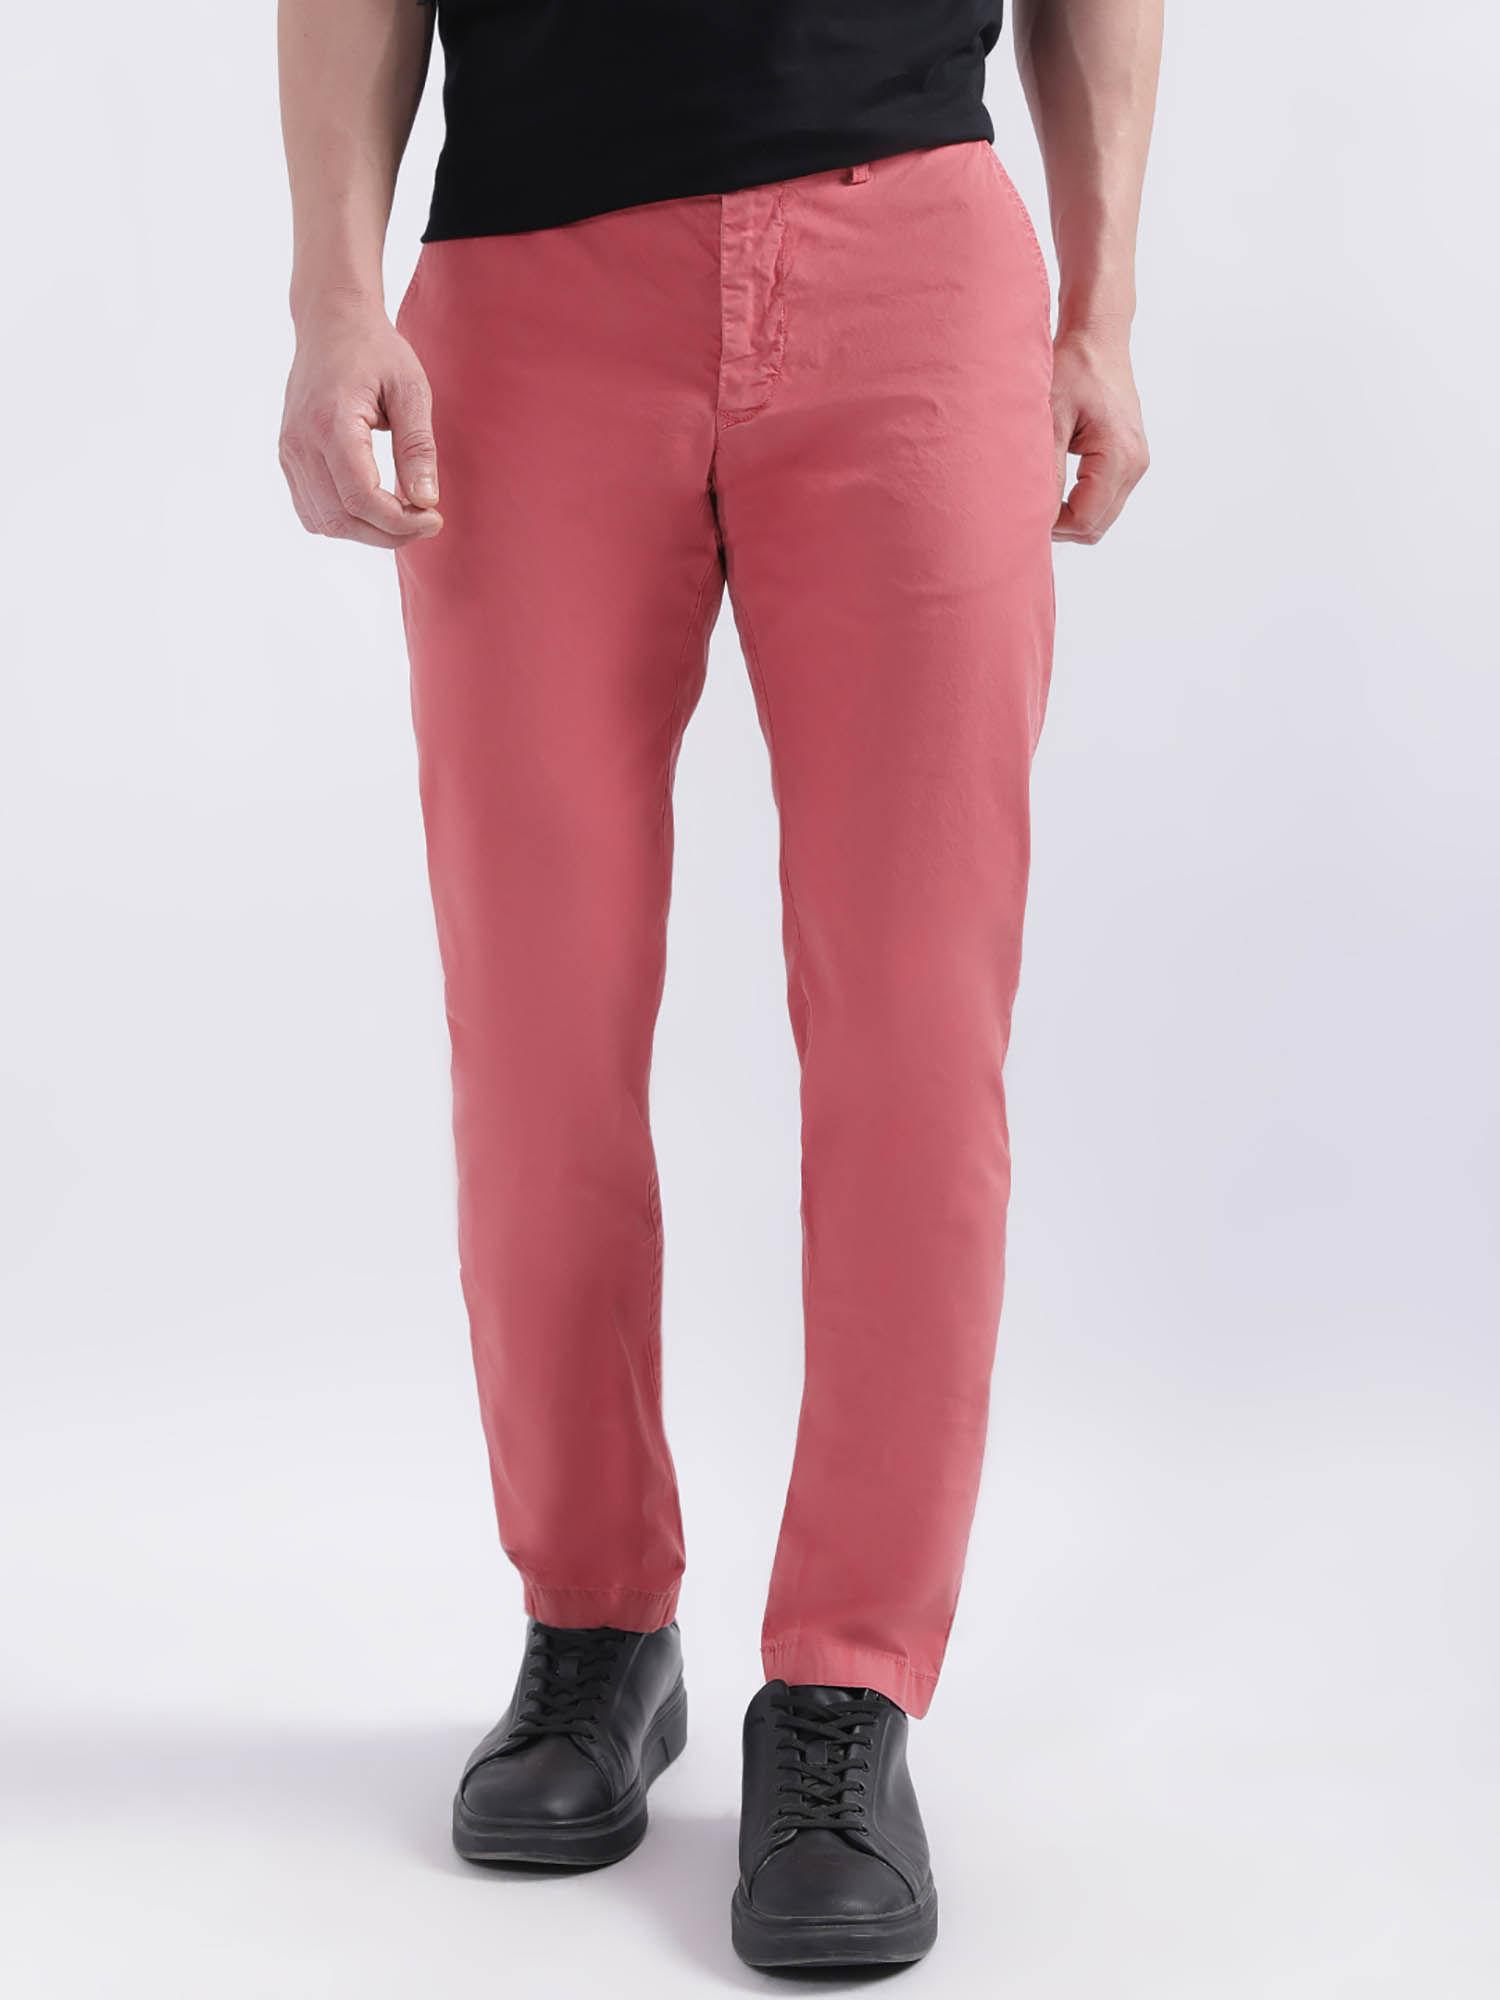 mens solid red trouser